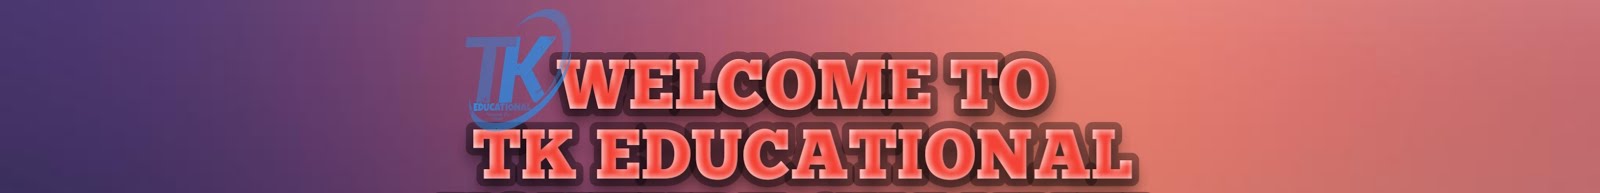 WELCOME TO TK EDUCATIONAL